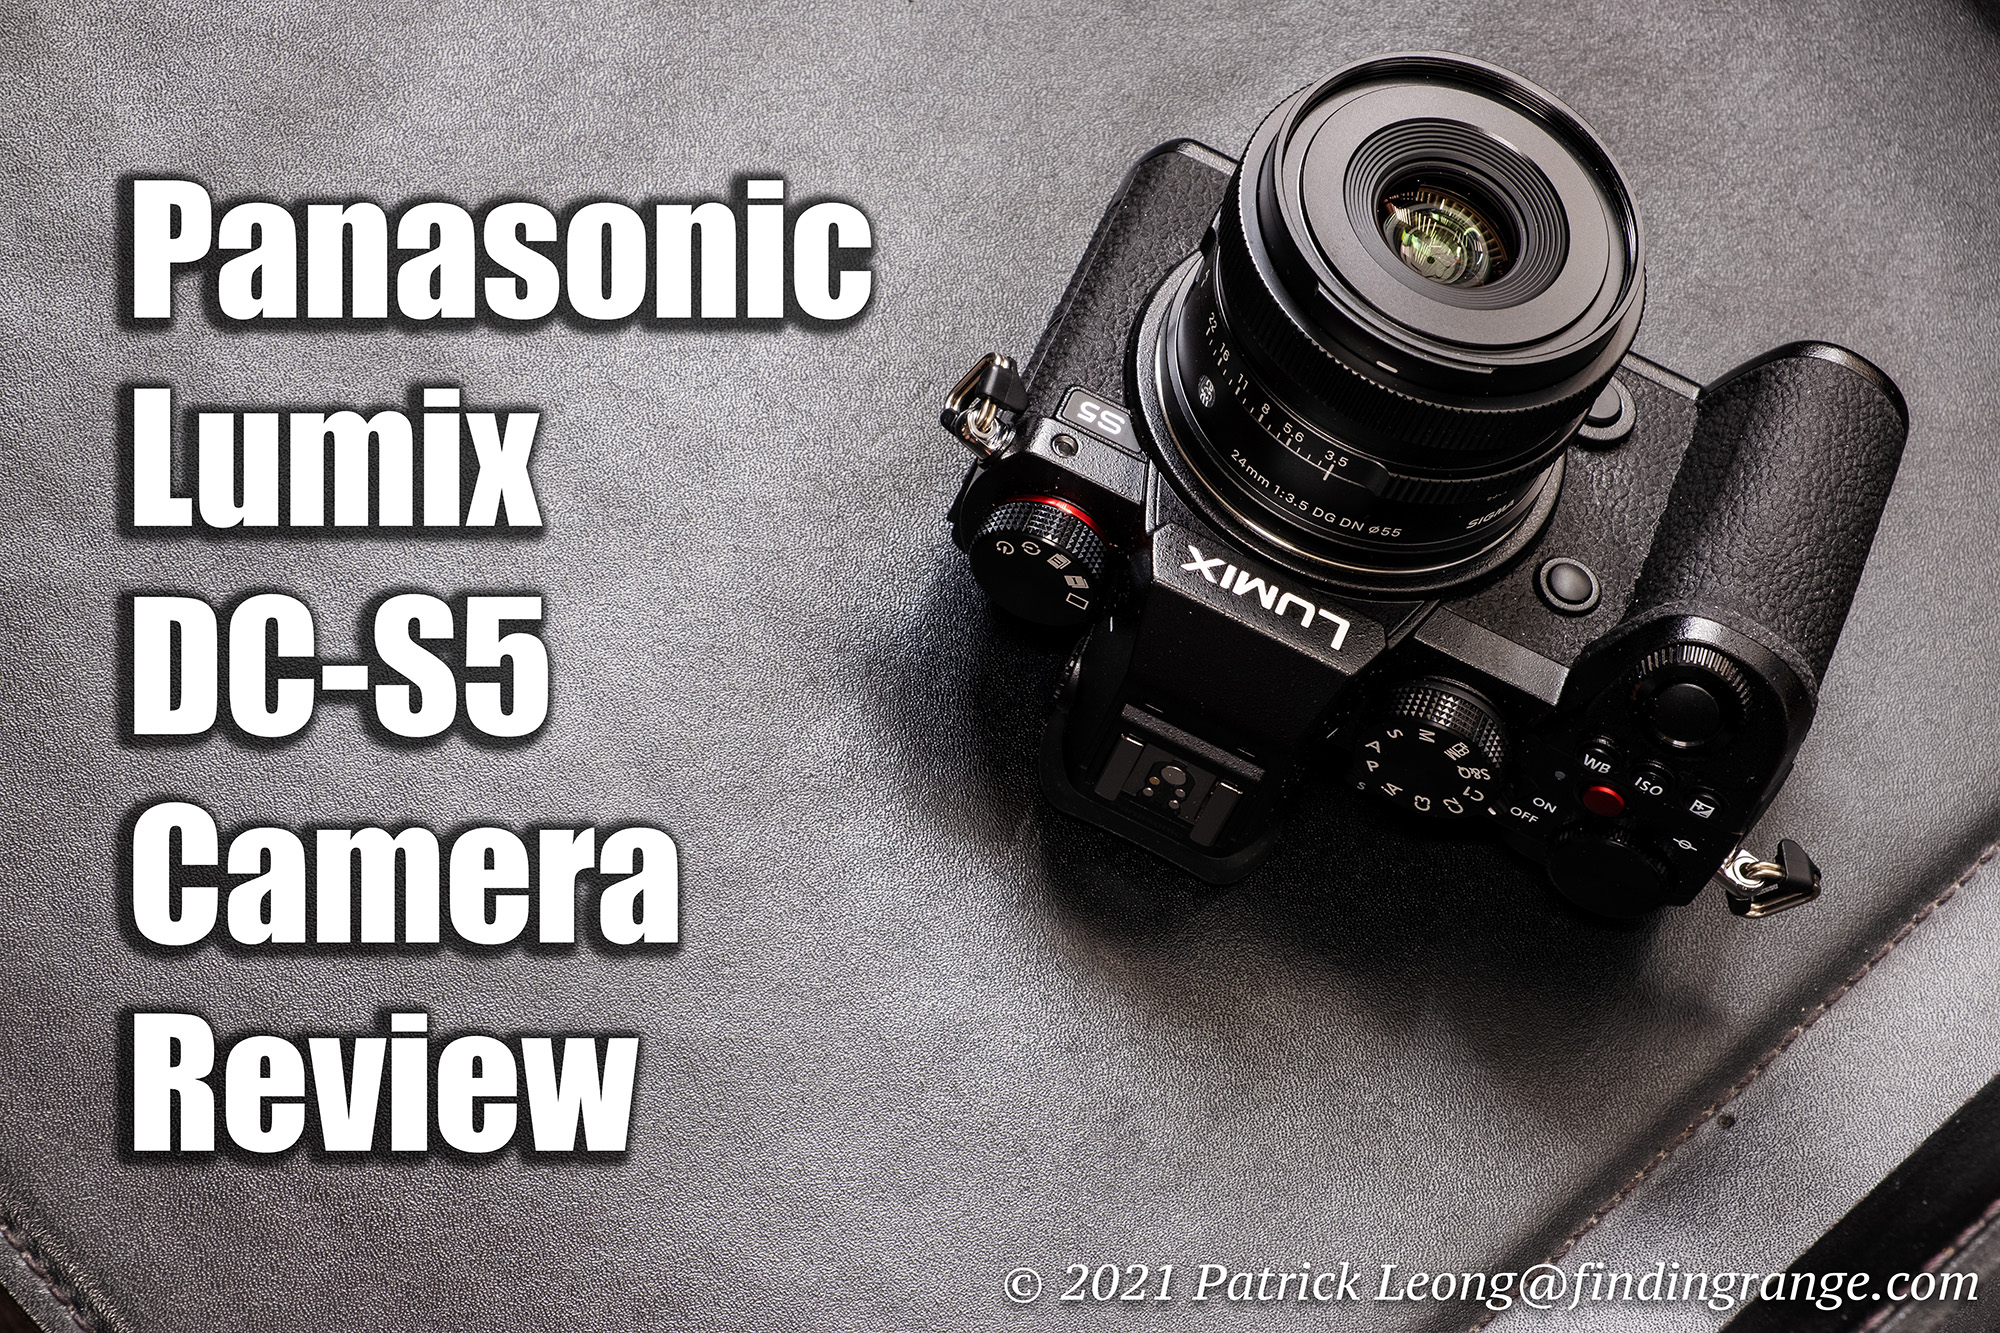 Why the LUMIX S5 II is So Great for Manual Focus